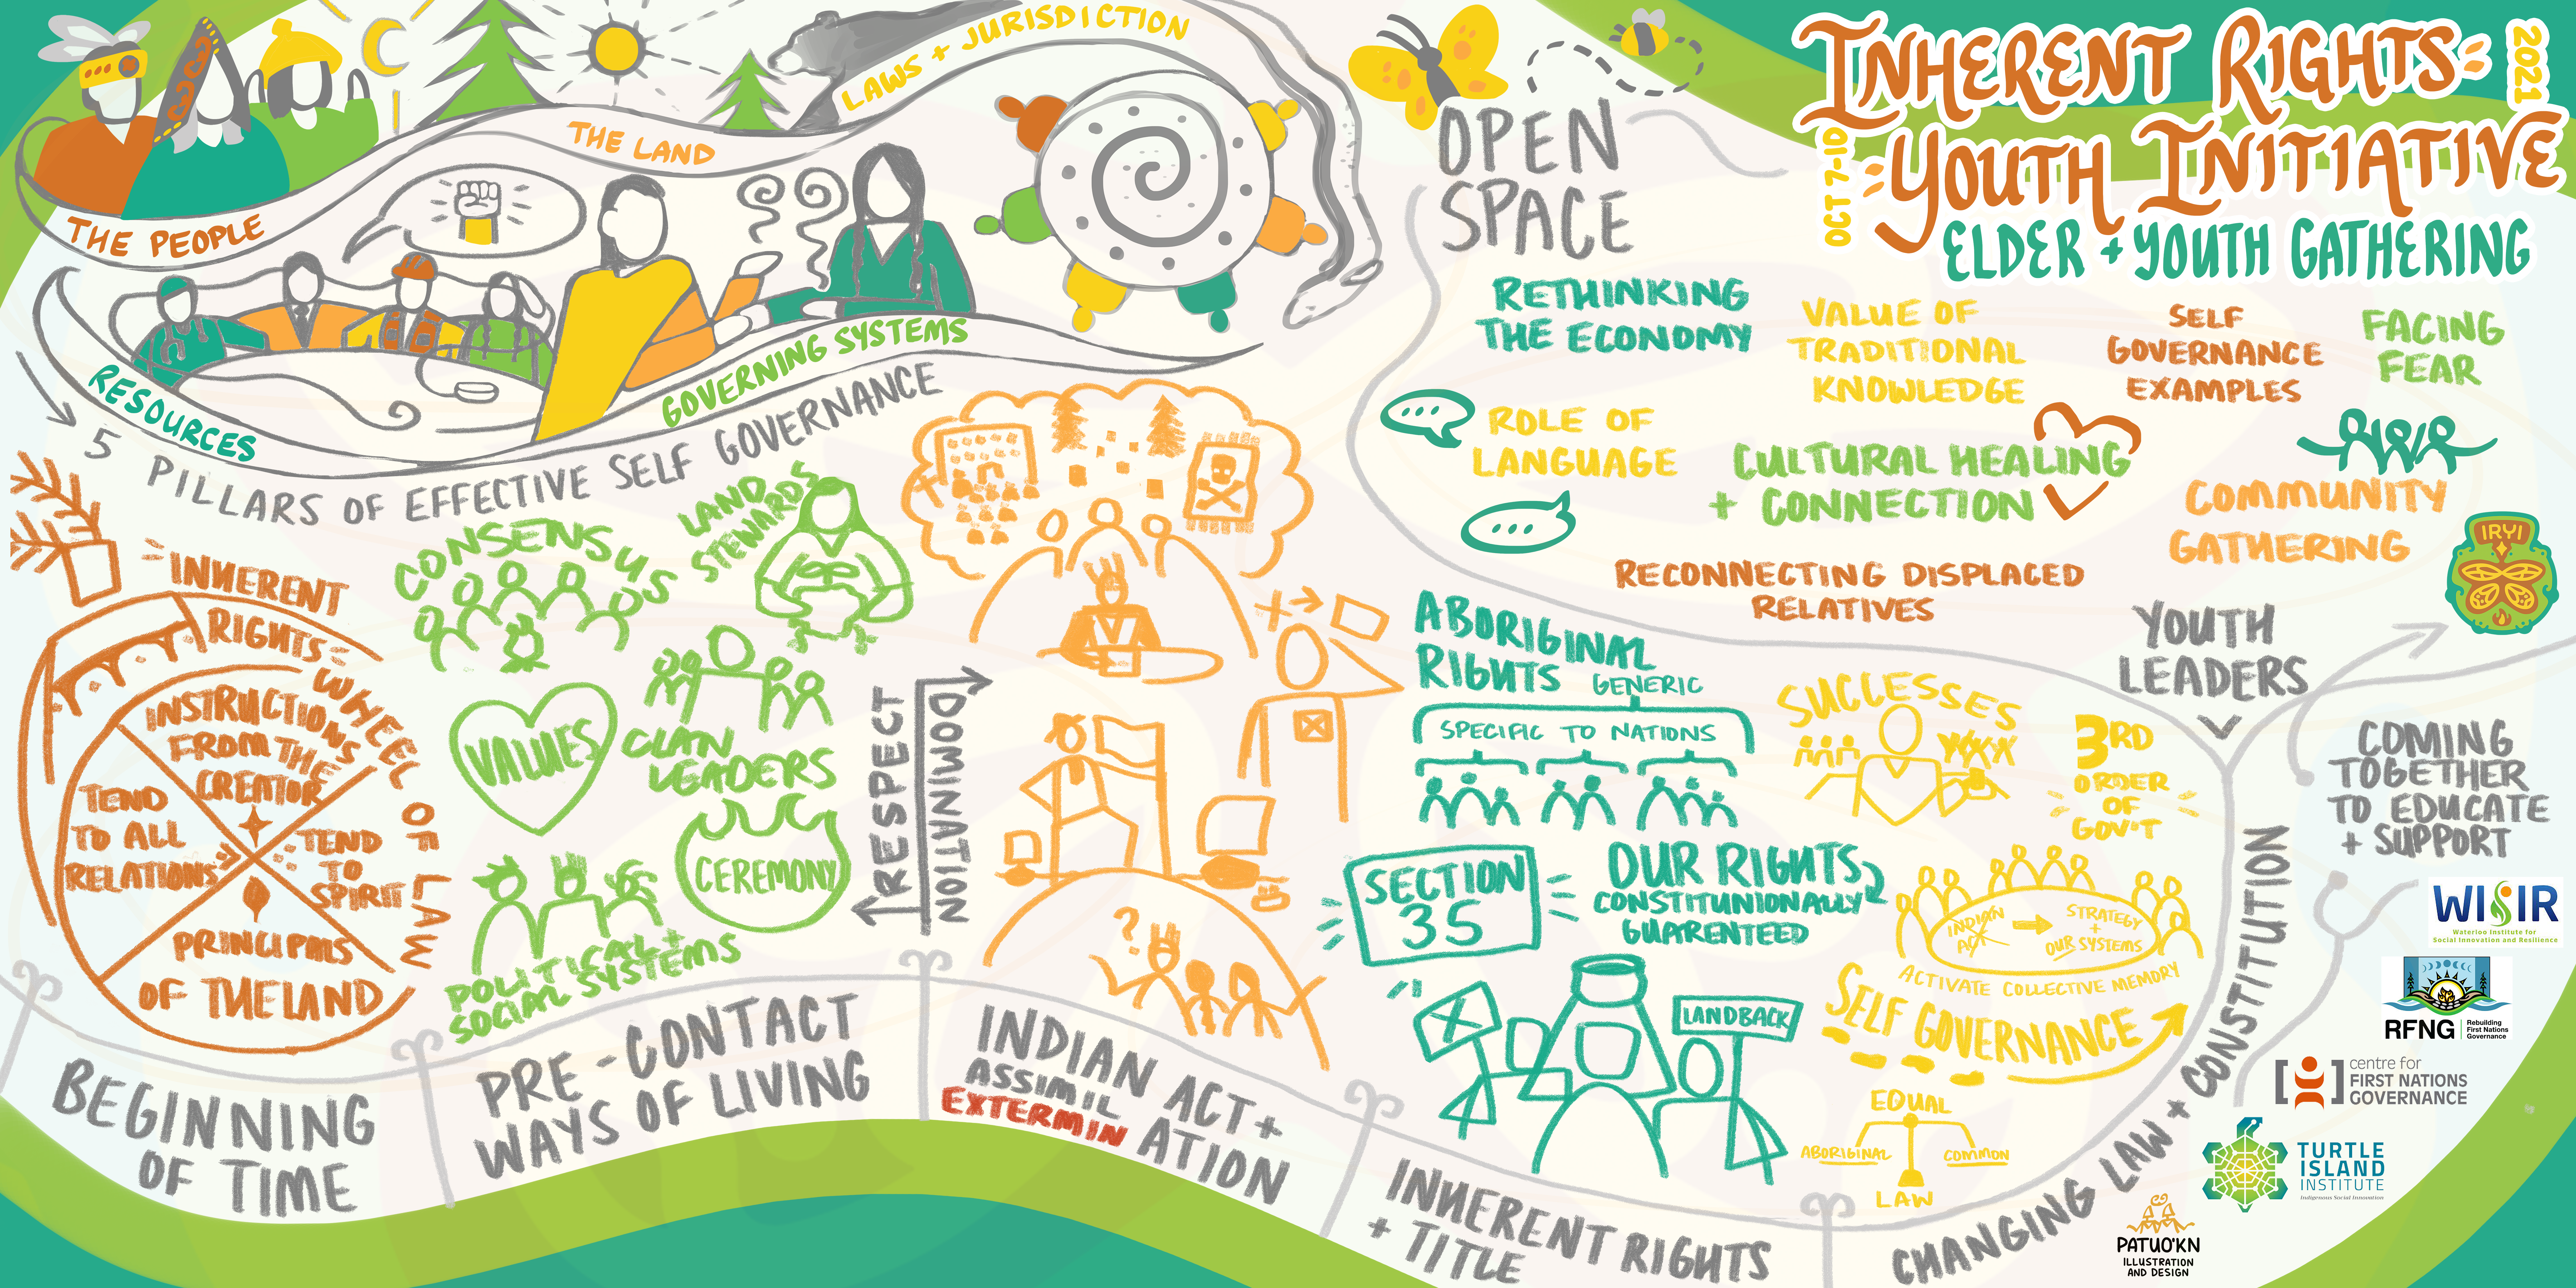 Inherent Rights Youth Initiative - Elder and Youth Gathering Oct 7-10 2021 - Graphic Recording